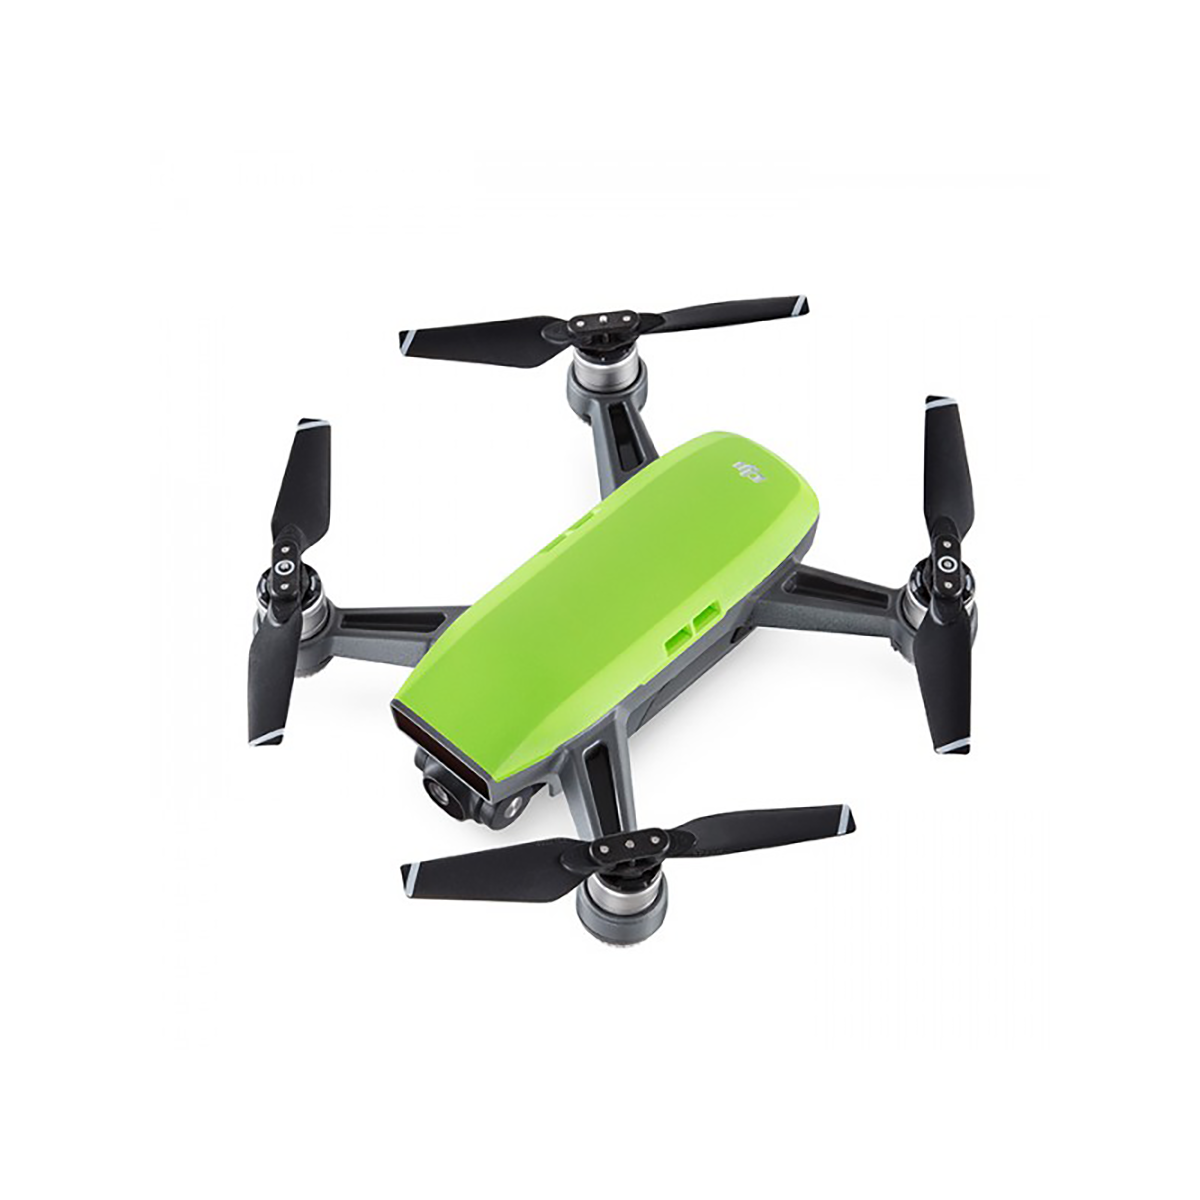 dji spark green fly more combo